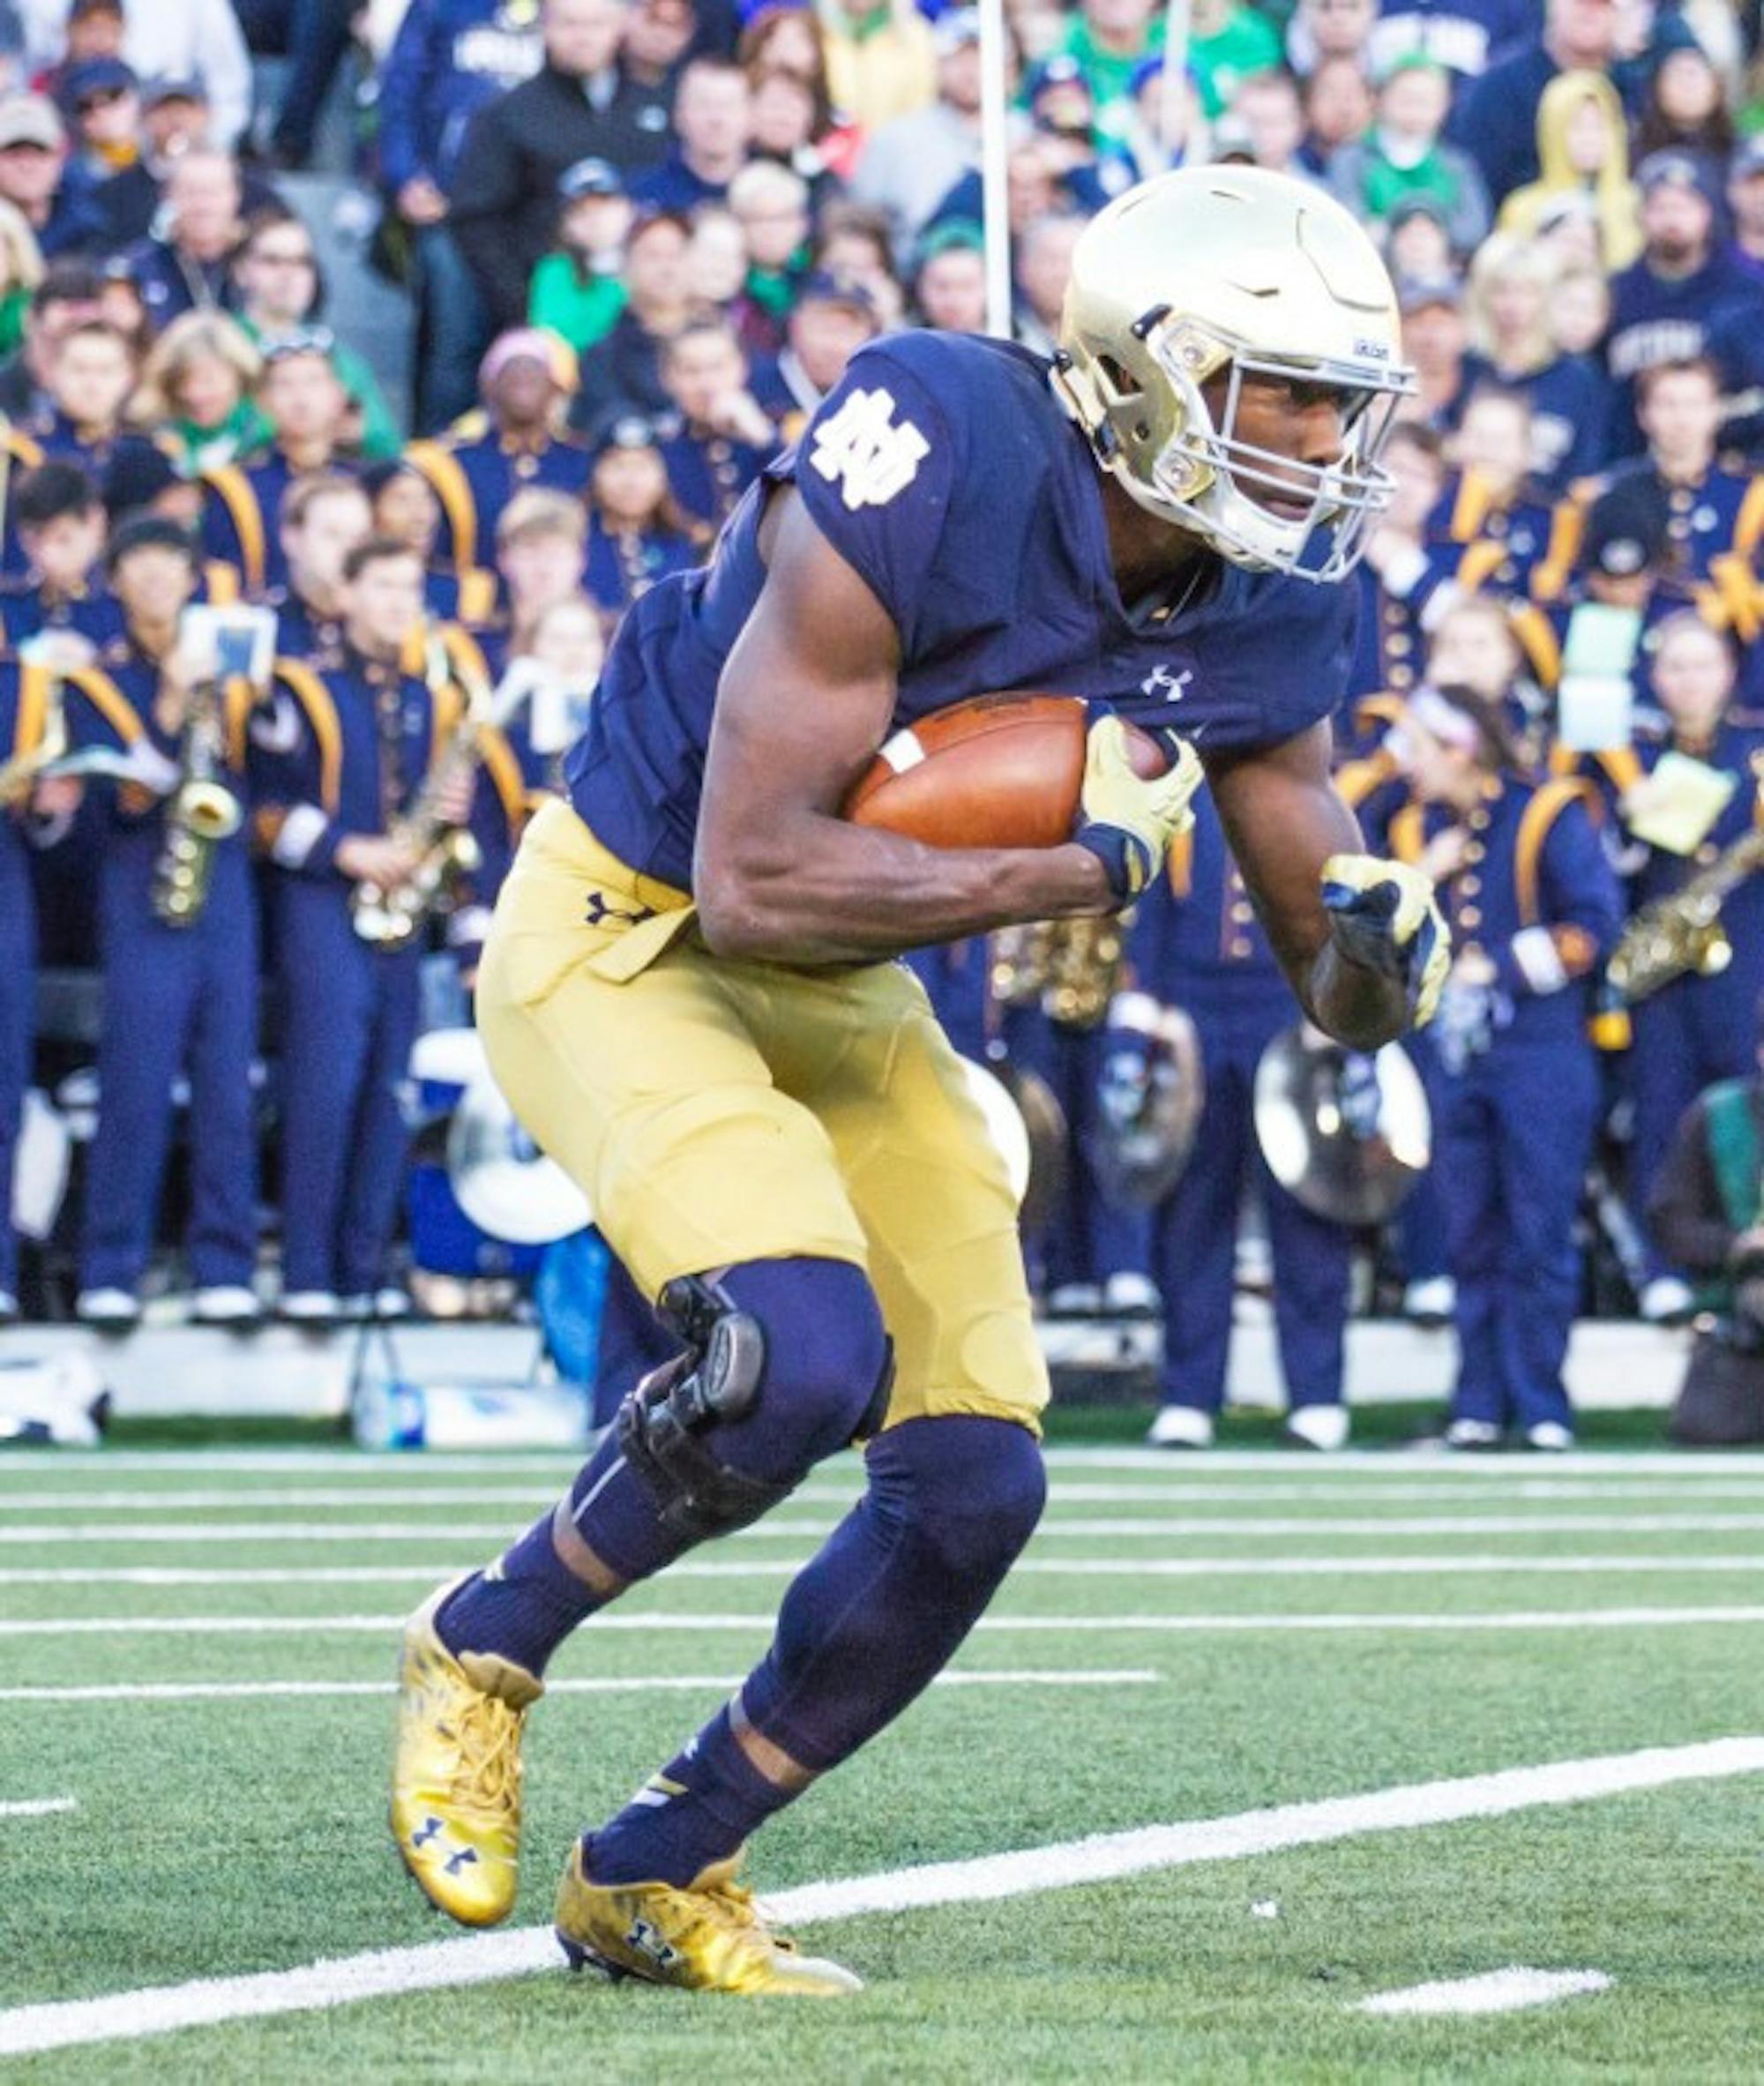 Freshman running back Josh Adams looks for a hole for a touchdown and an all-time Irish record for longest play from scrimmage.